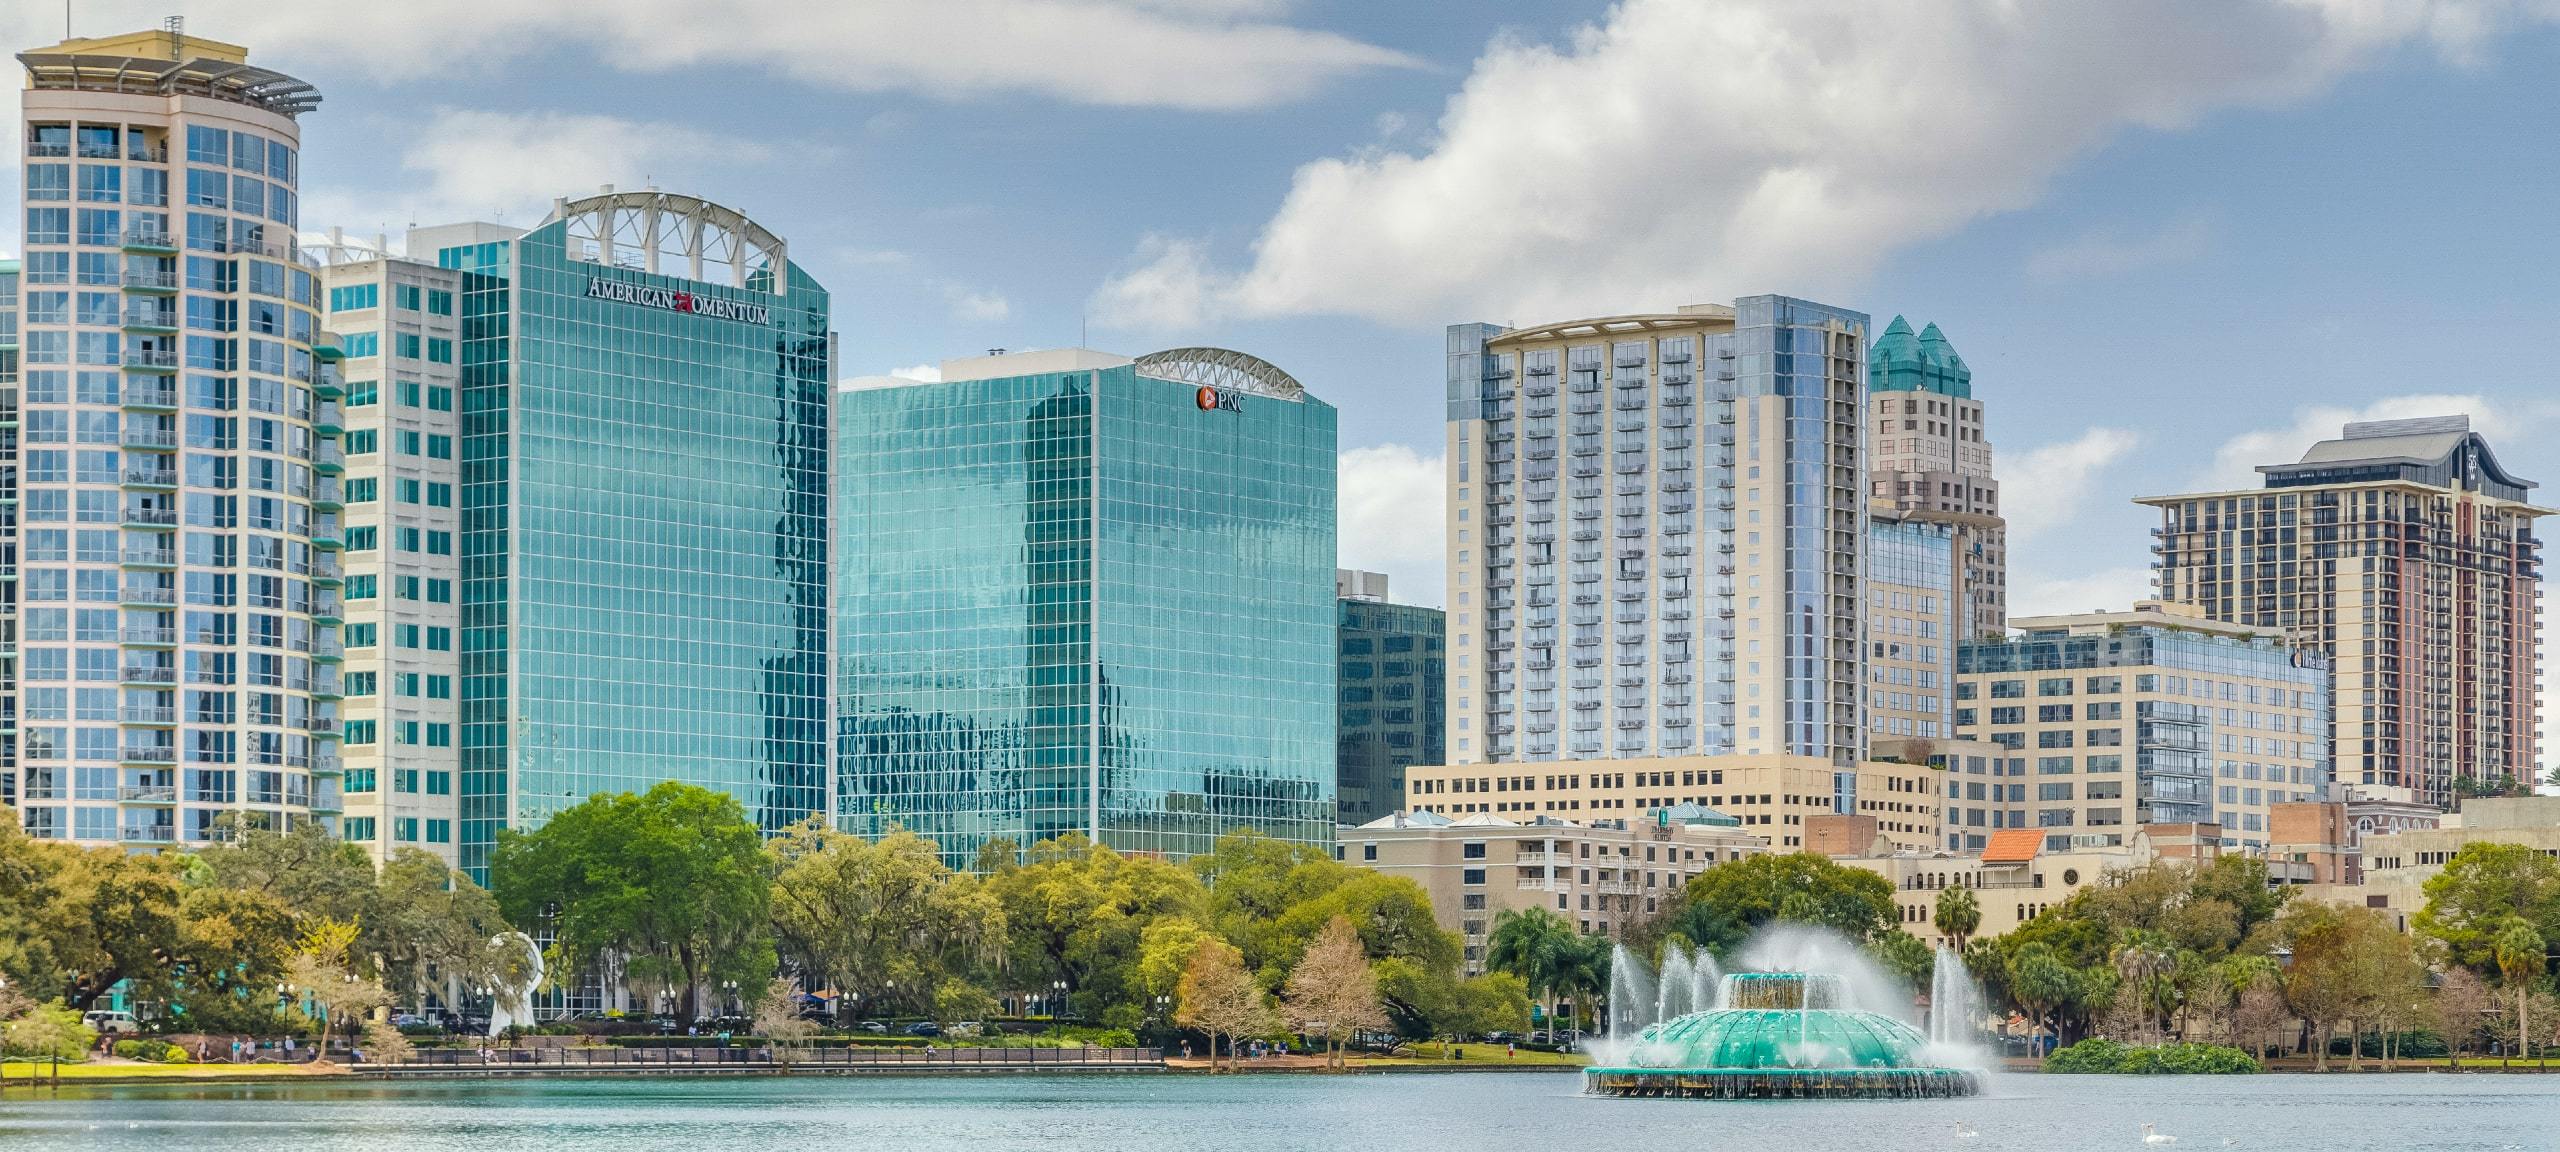 Commercial real estate and condos along Downtown Orlando waterfront